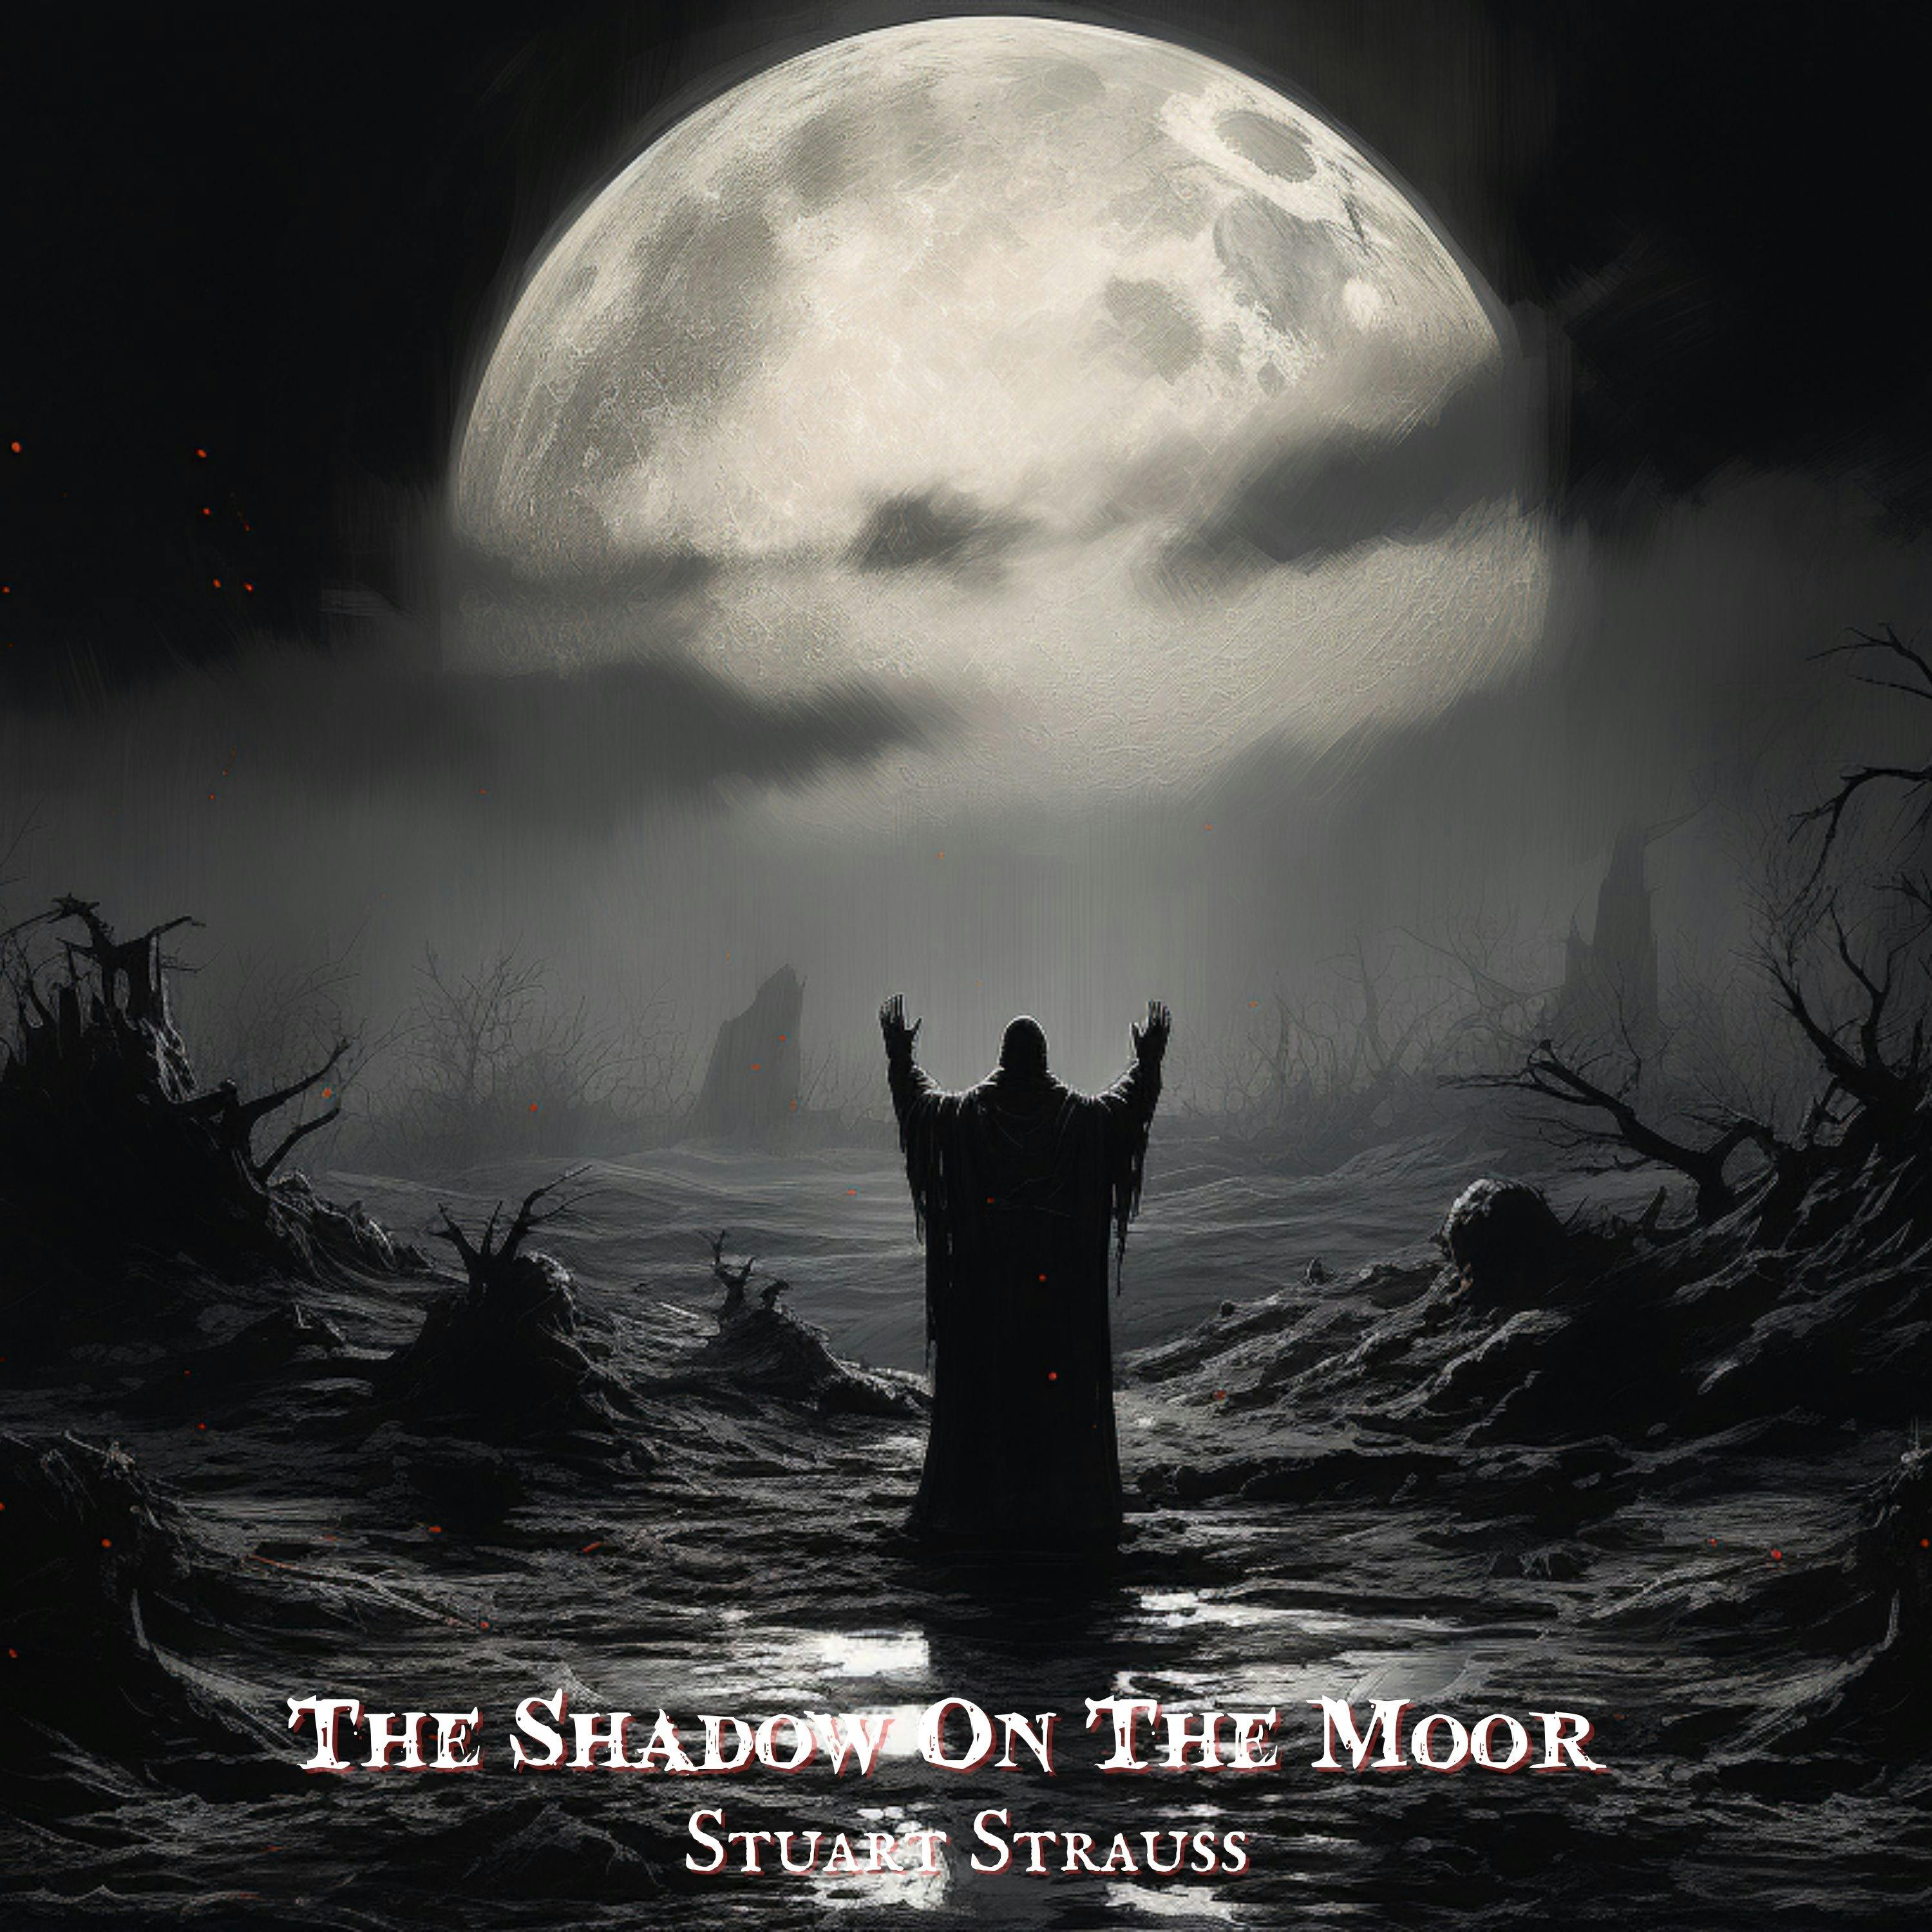 The Shadow on The Moor by Stuart Strauss